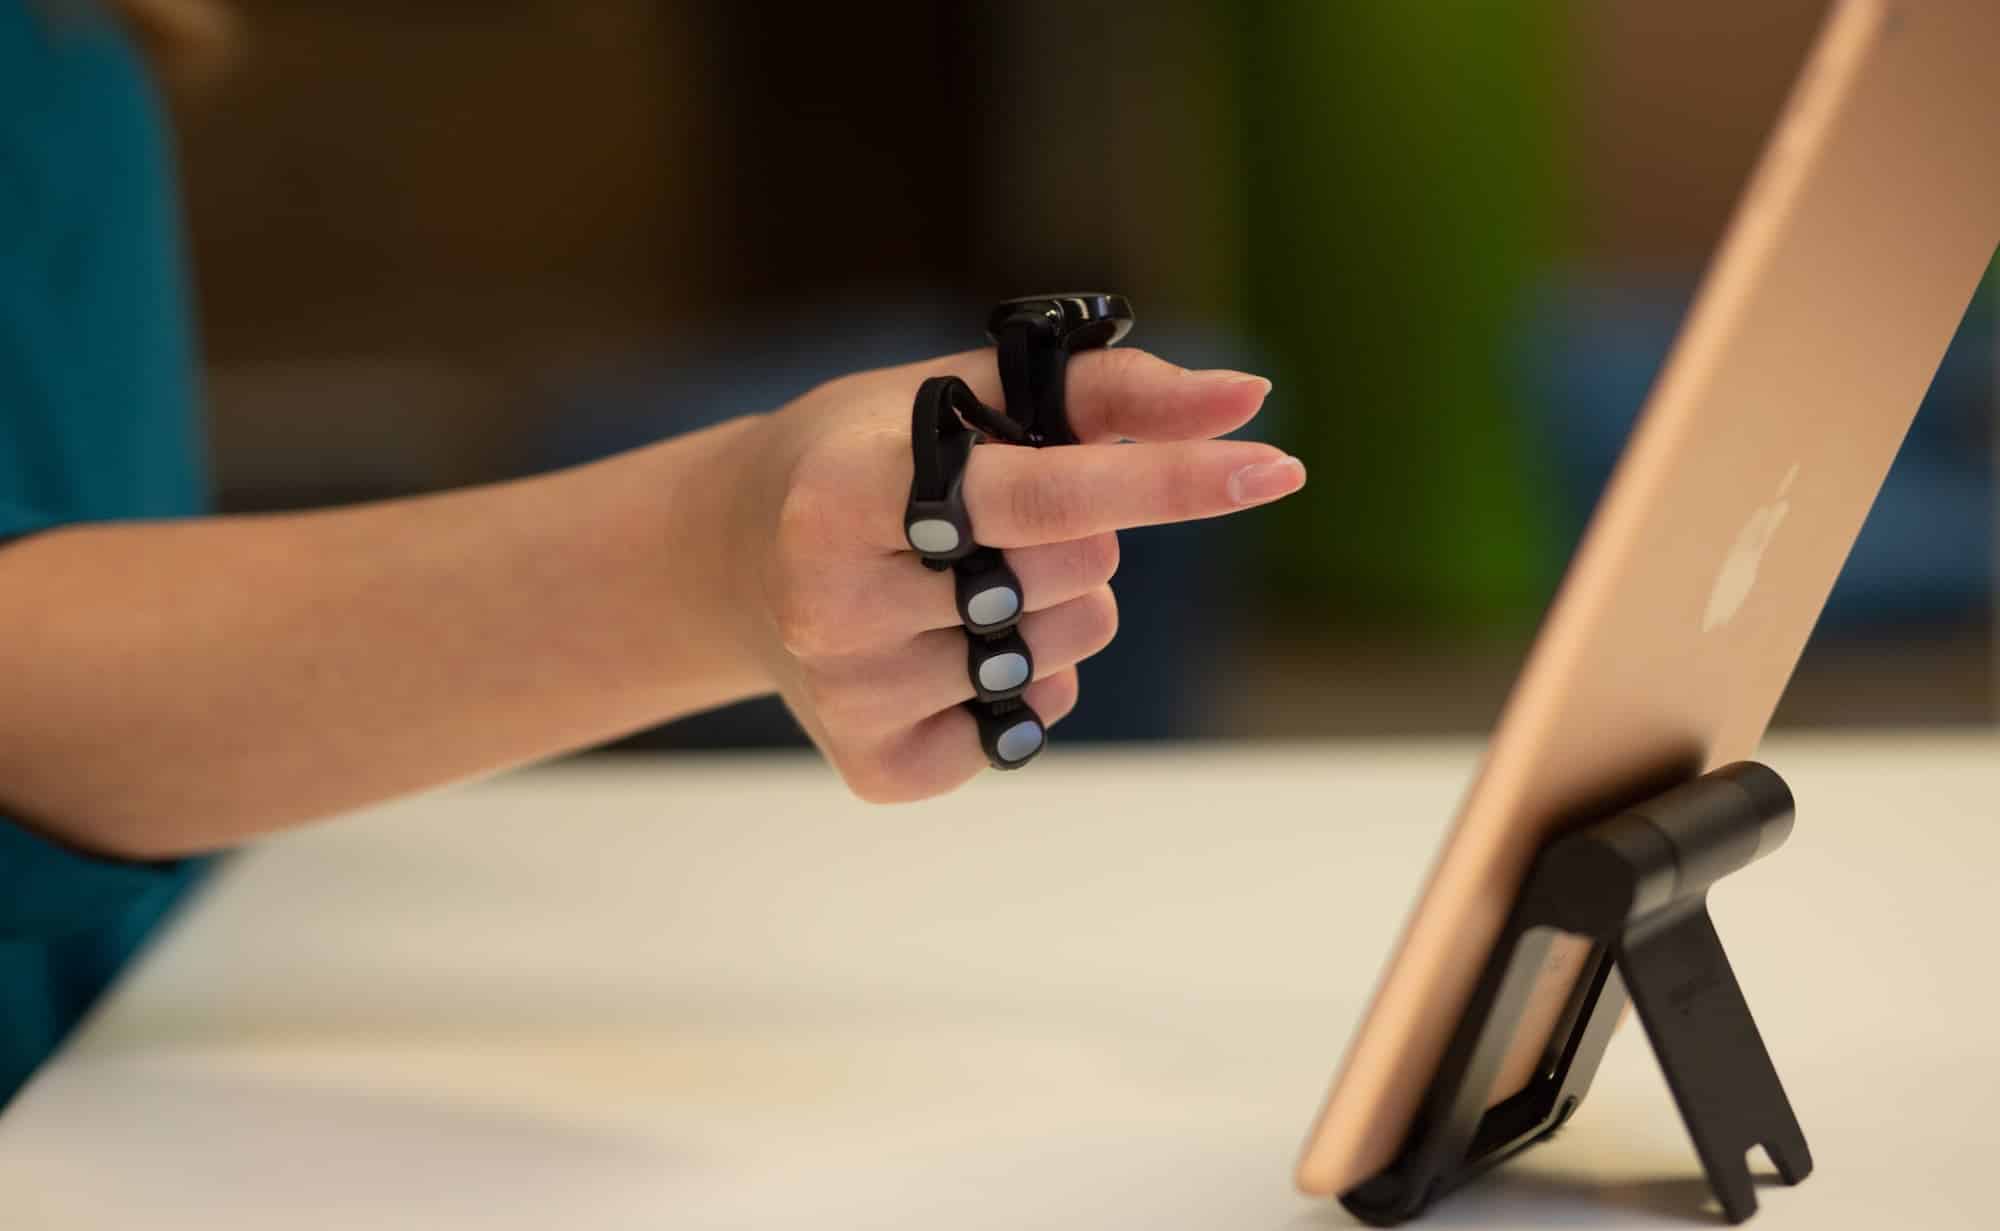 Tap Strap 2 Wearable Peripheral Controller